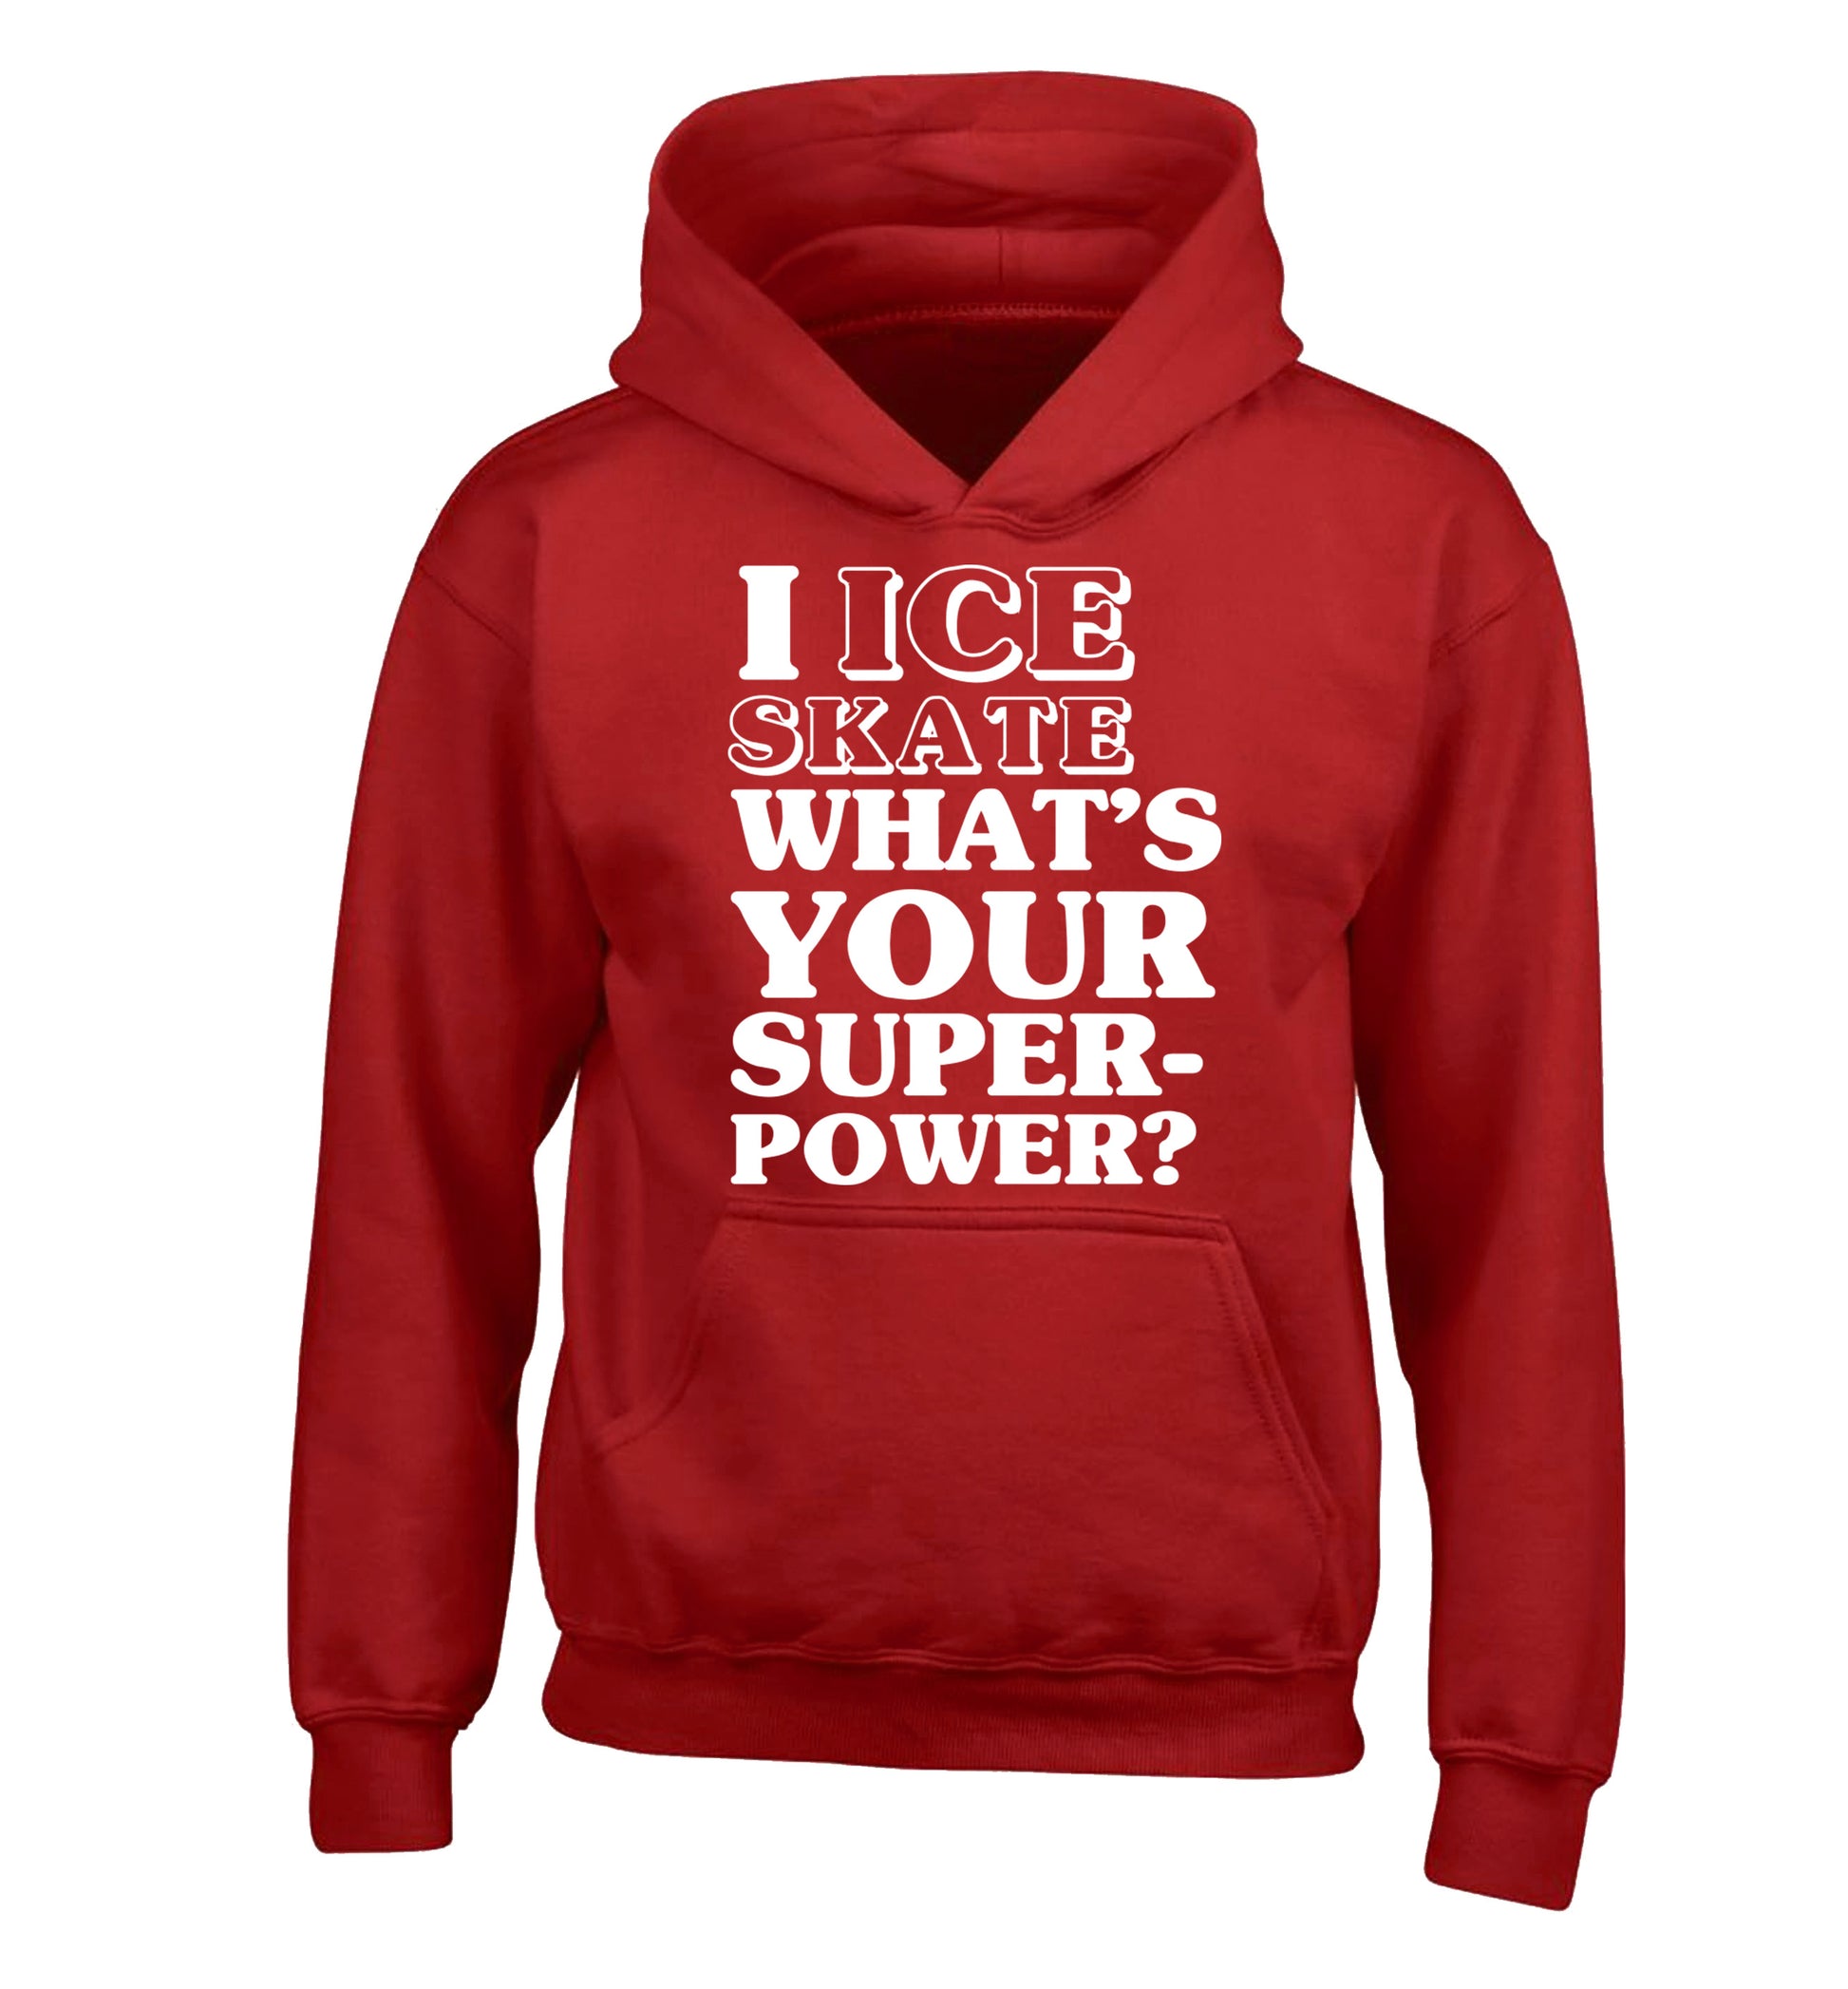 I ice skate what's your superpower? children's red hoodie 12-14 Years